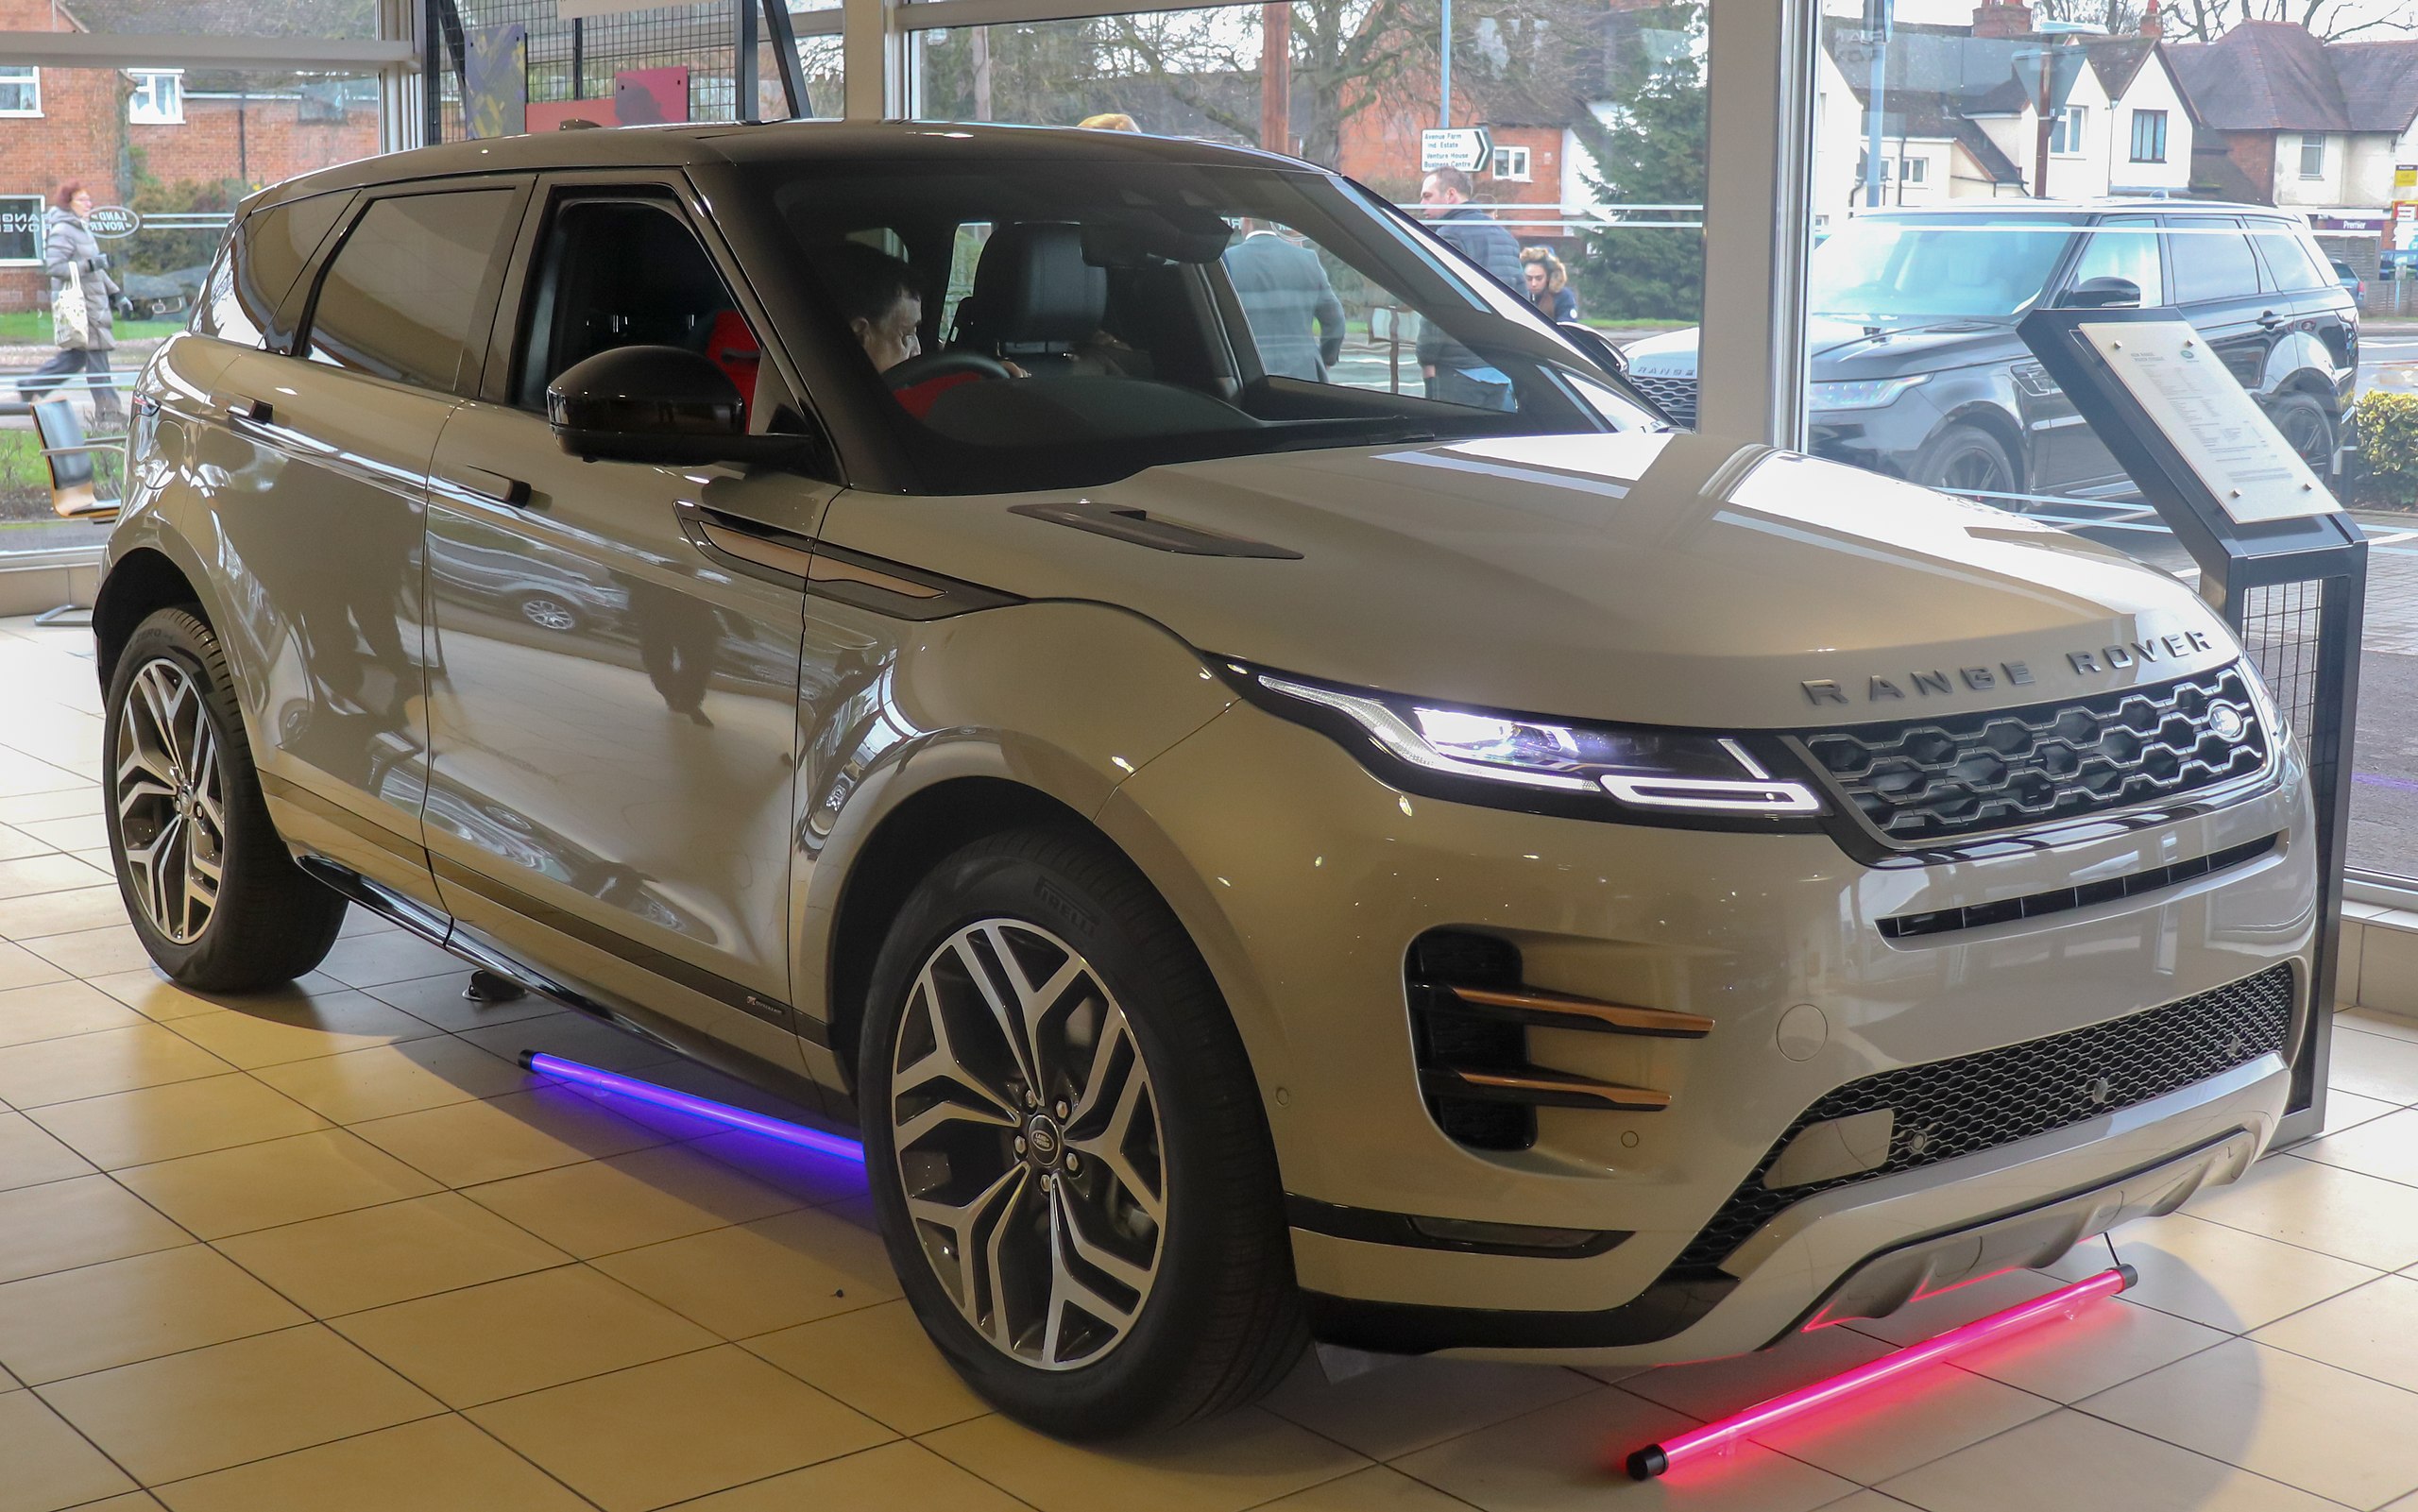 https://upload.wikimedia.org/wikipedia/commons/thumb/6/62/2019_Land_Rover_Range_Rover_Evoque_D180_SE_Front.jpg/2560px-2019_Land_Rover_Range_Rover_Evoque_D180_SE_Front.jpg